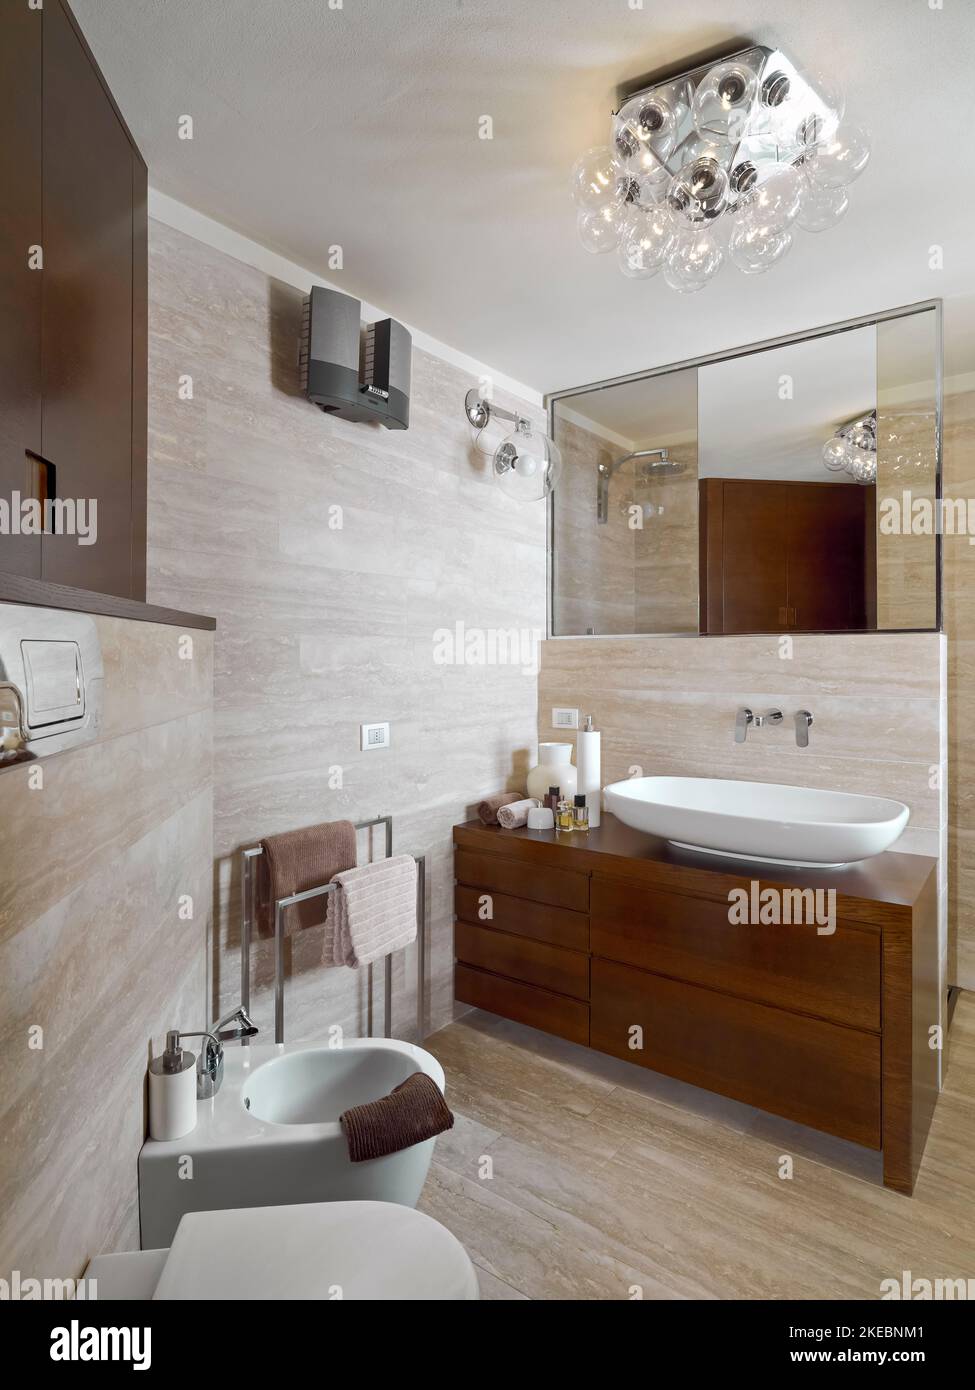 modern interior of the bathroom, in the foreground the bidet and the wooden washbasin cabinet with countertop washbasin, walls and floor are covered i Stock Photo